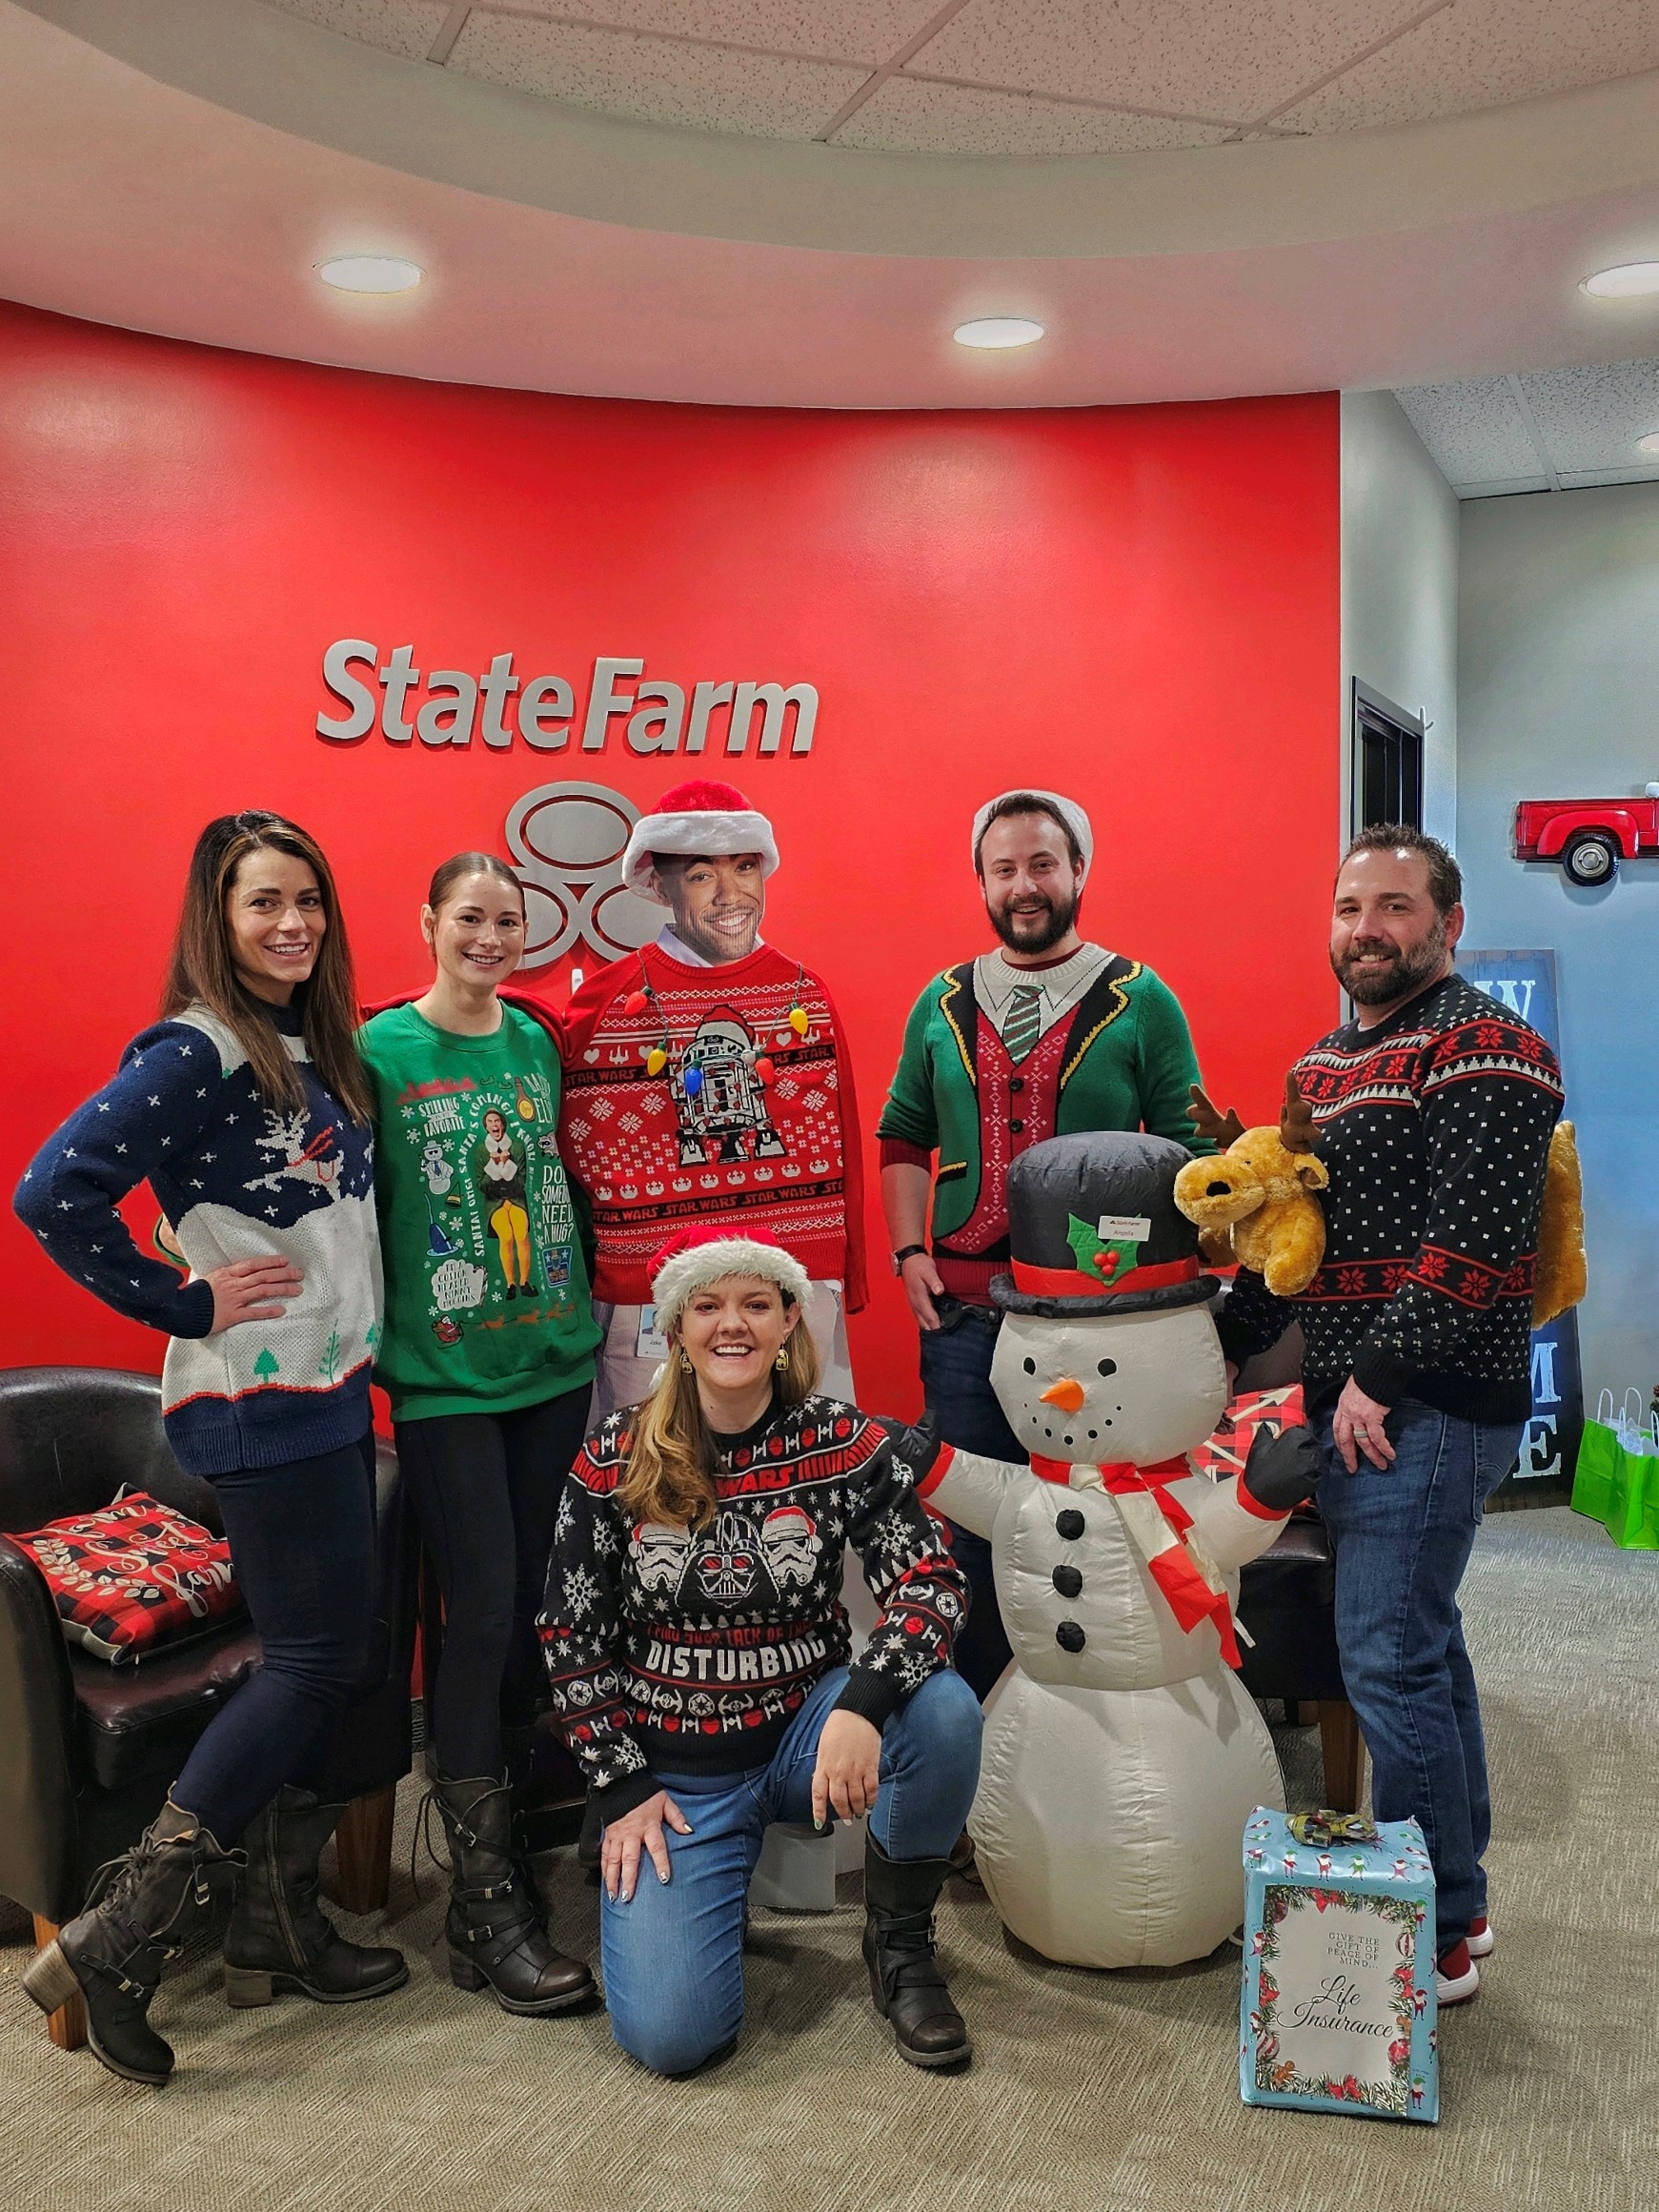 Happy Holidays from the Nick Ainsworth State Farm team!